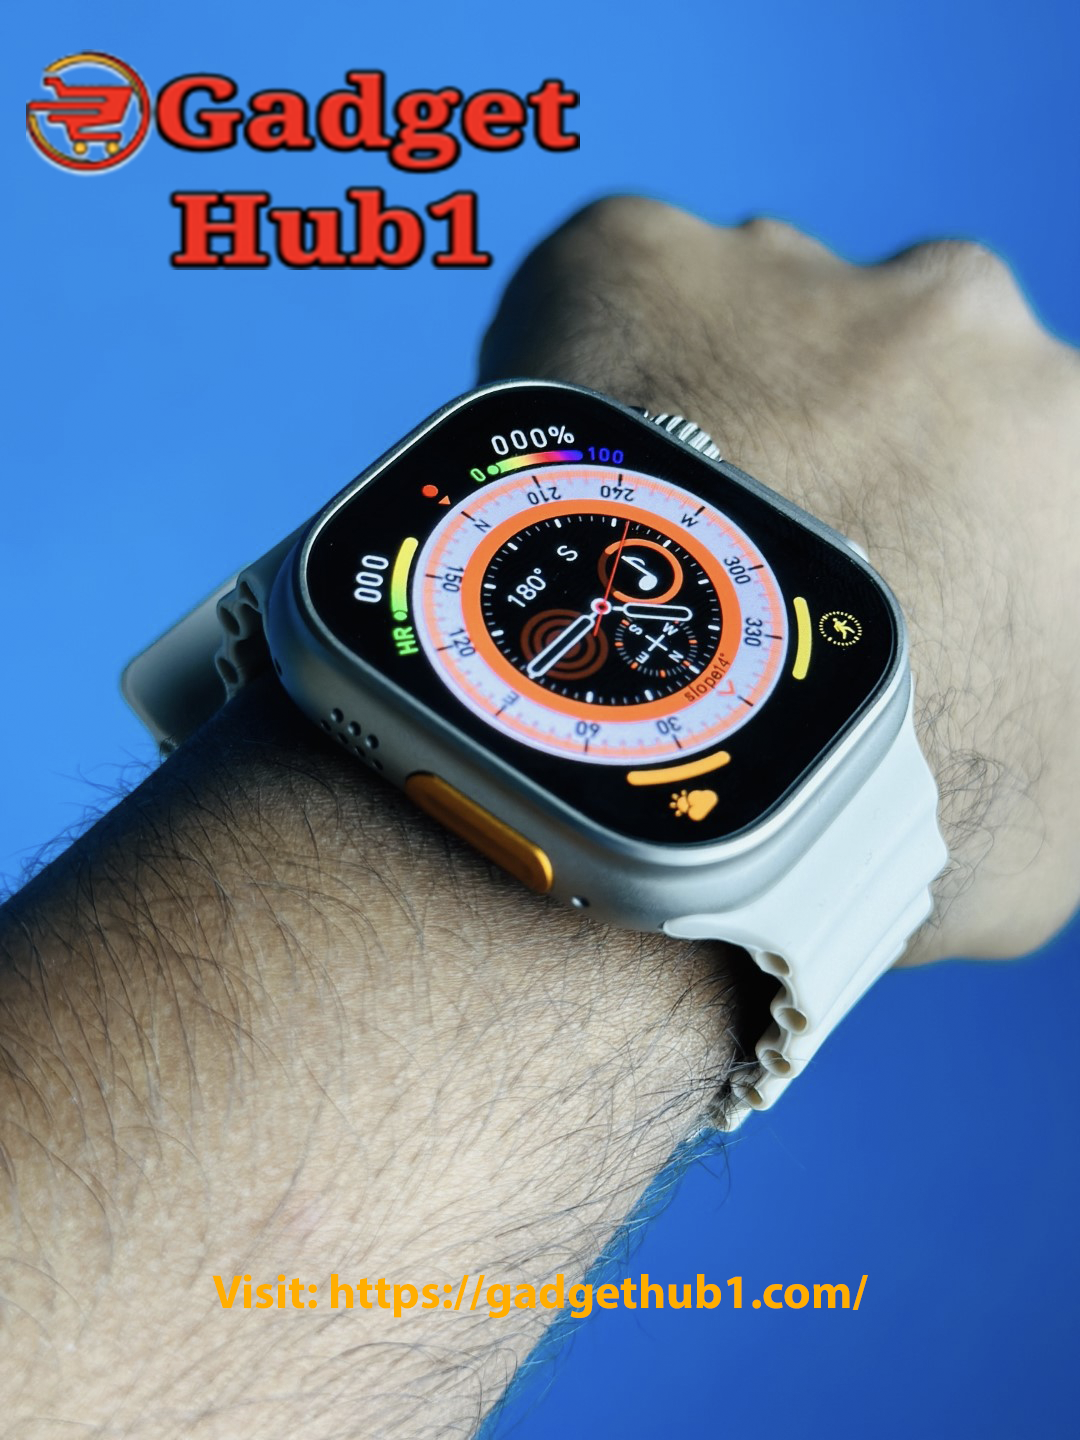 HK8 Pro Max Ultra Waterproof Smart Watch with AMOLED Display + 3 Days Battery Life